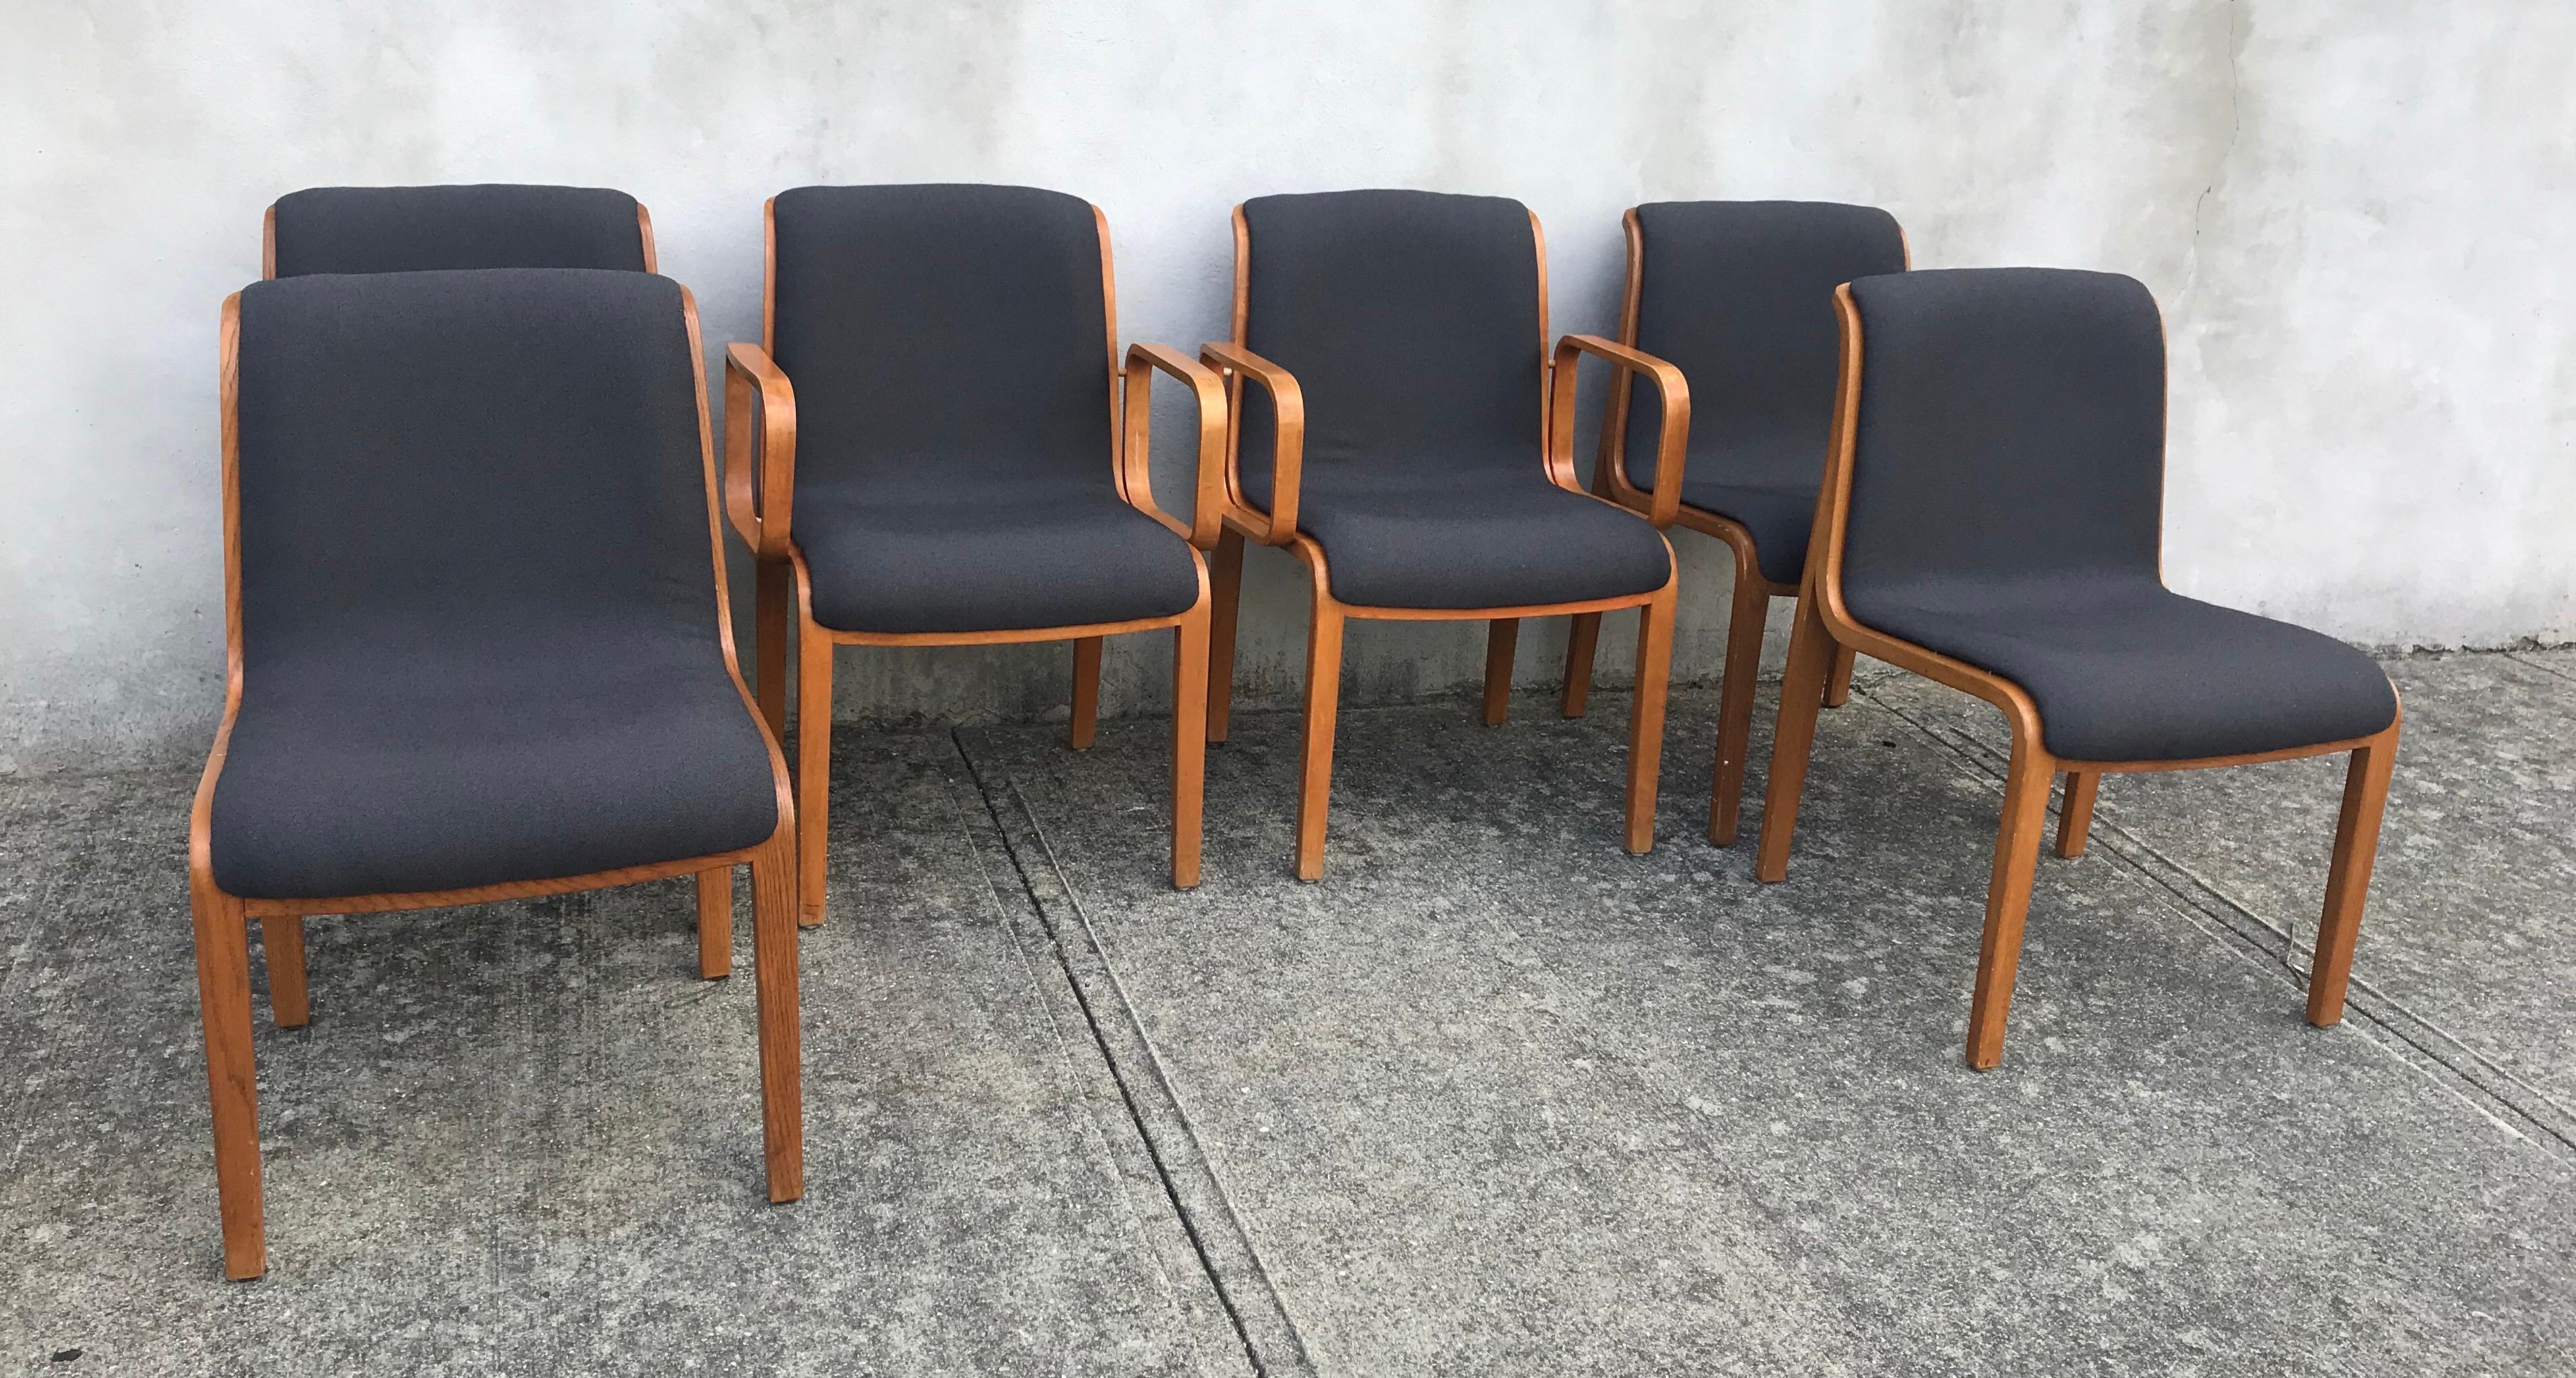 Beautiful set of six bentwood frame dining chairs by Bill Stephens for Knoll. Reupholstered in Knoll KT Collection fabric, hop sack slate grey.